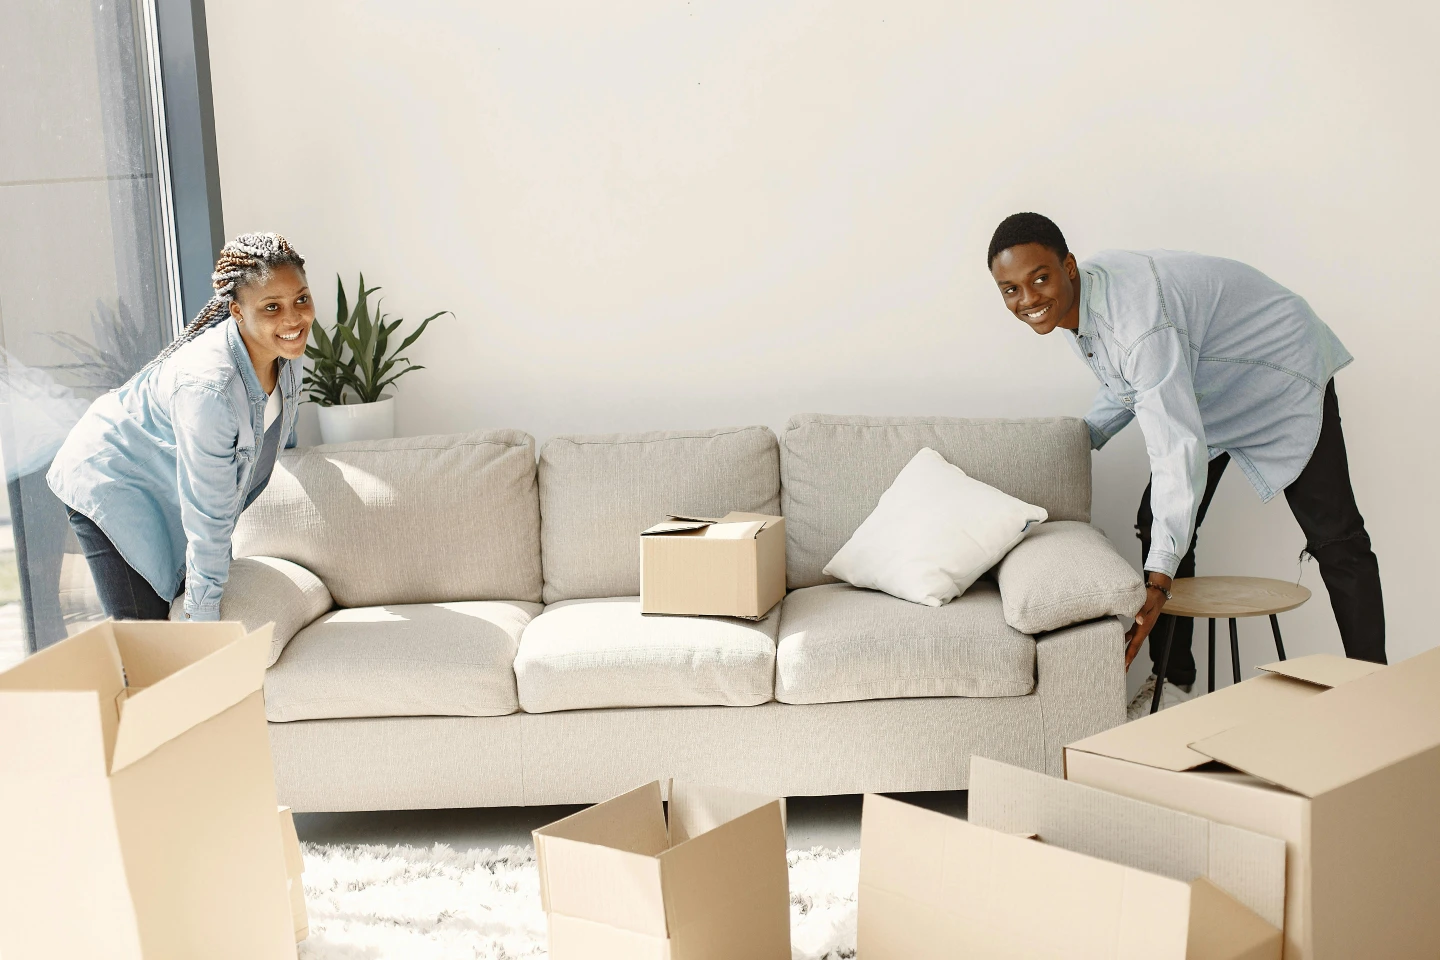 How to protect floors when moving furniture